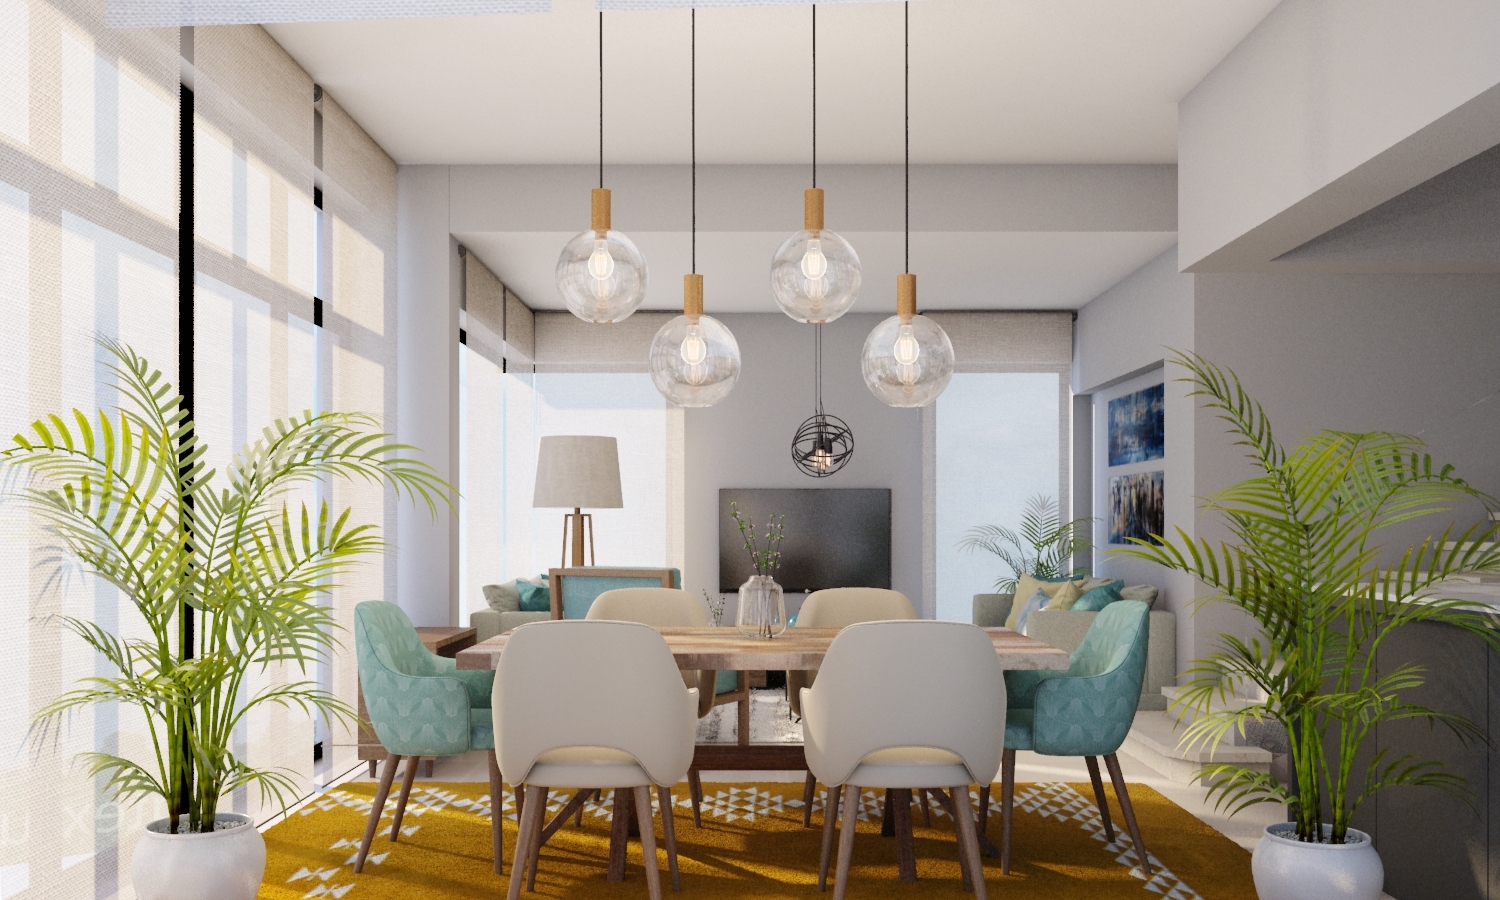 Gouna Dining Room with bright & happy colors